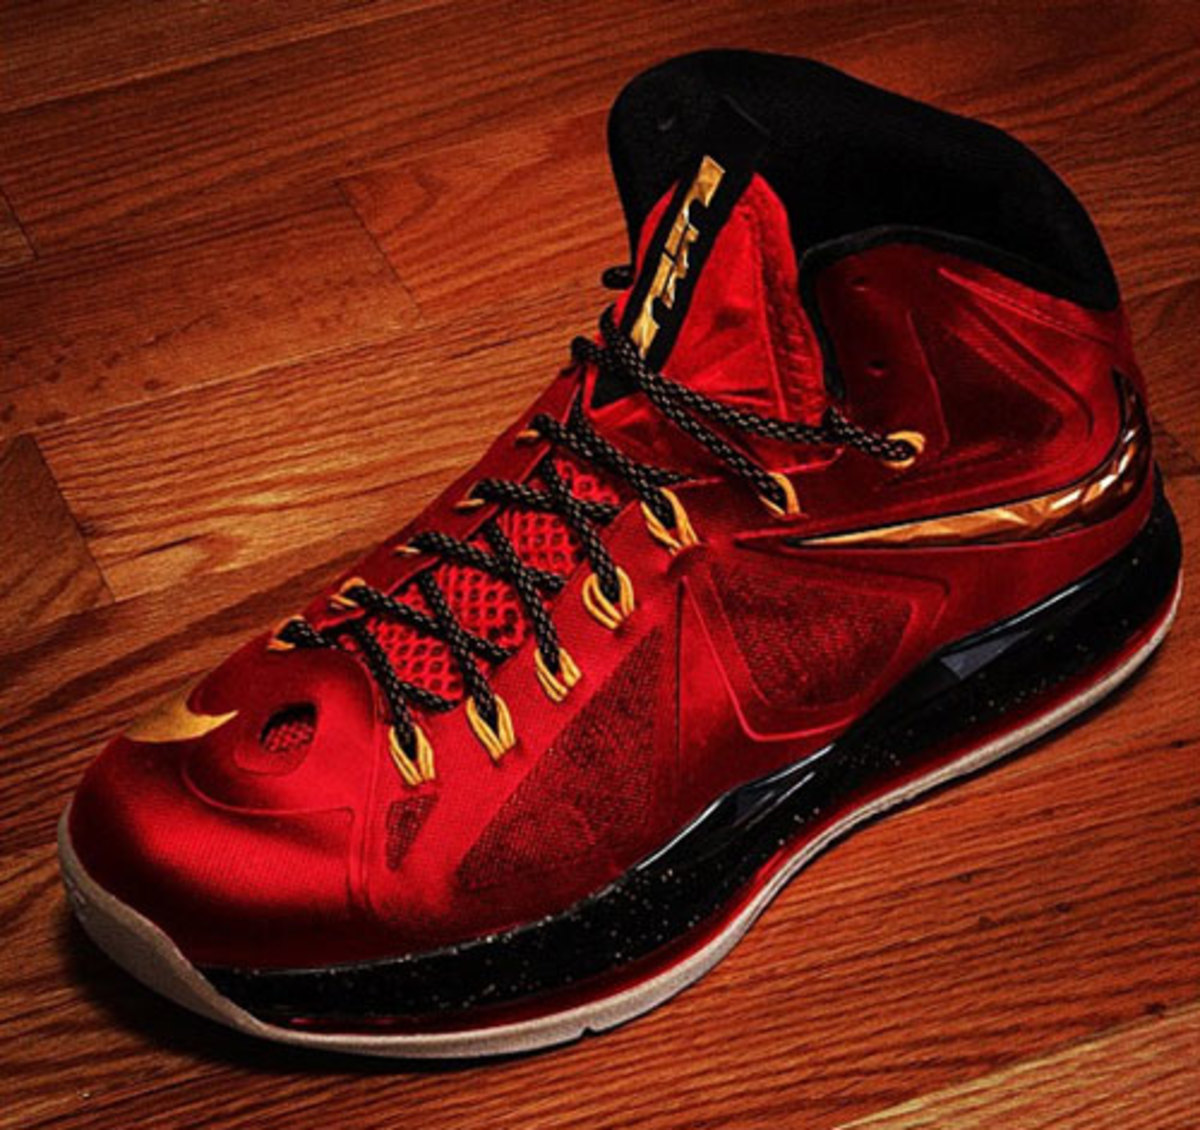 lebron 10 red and black